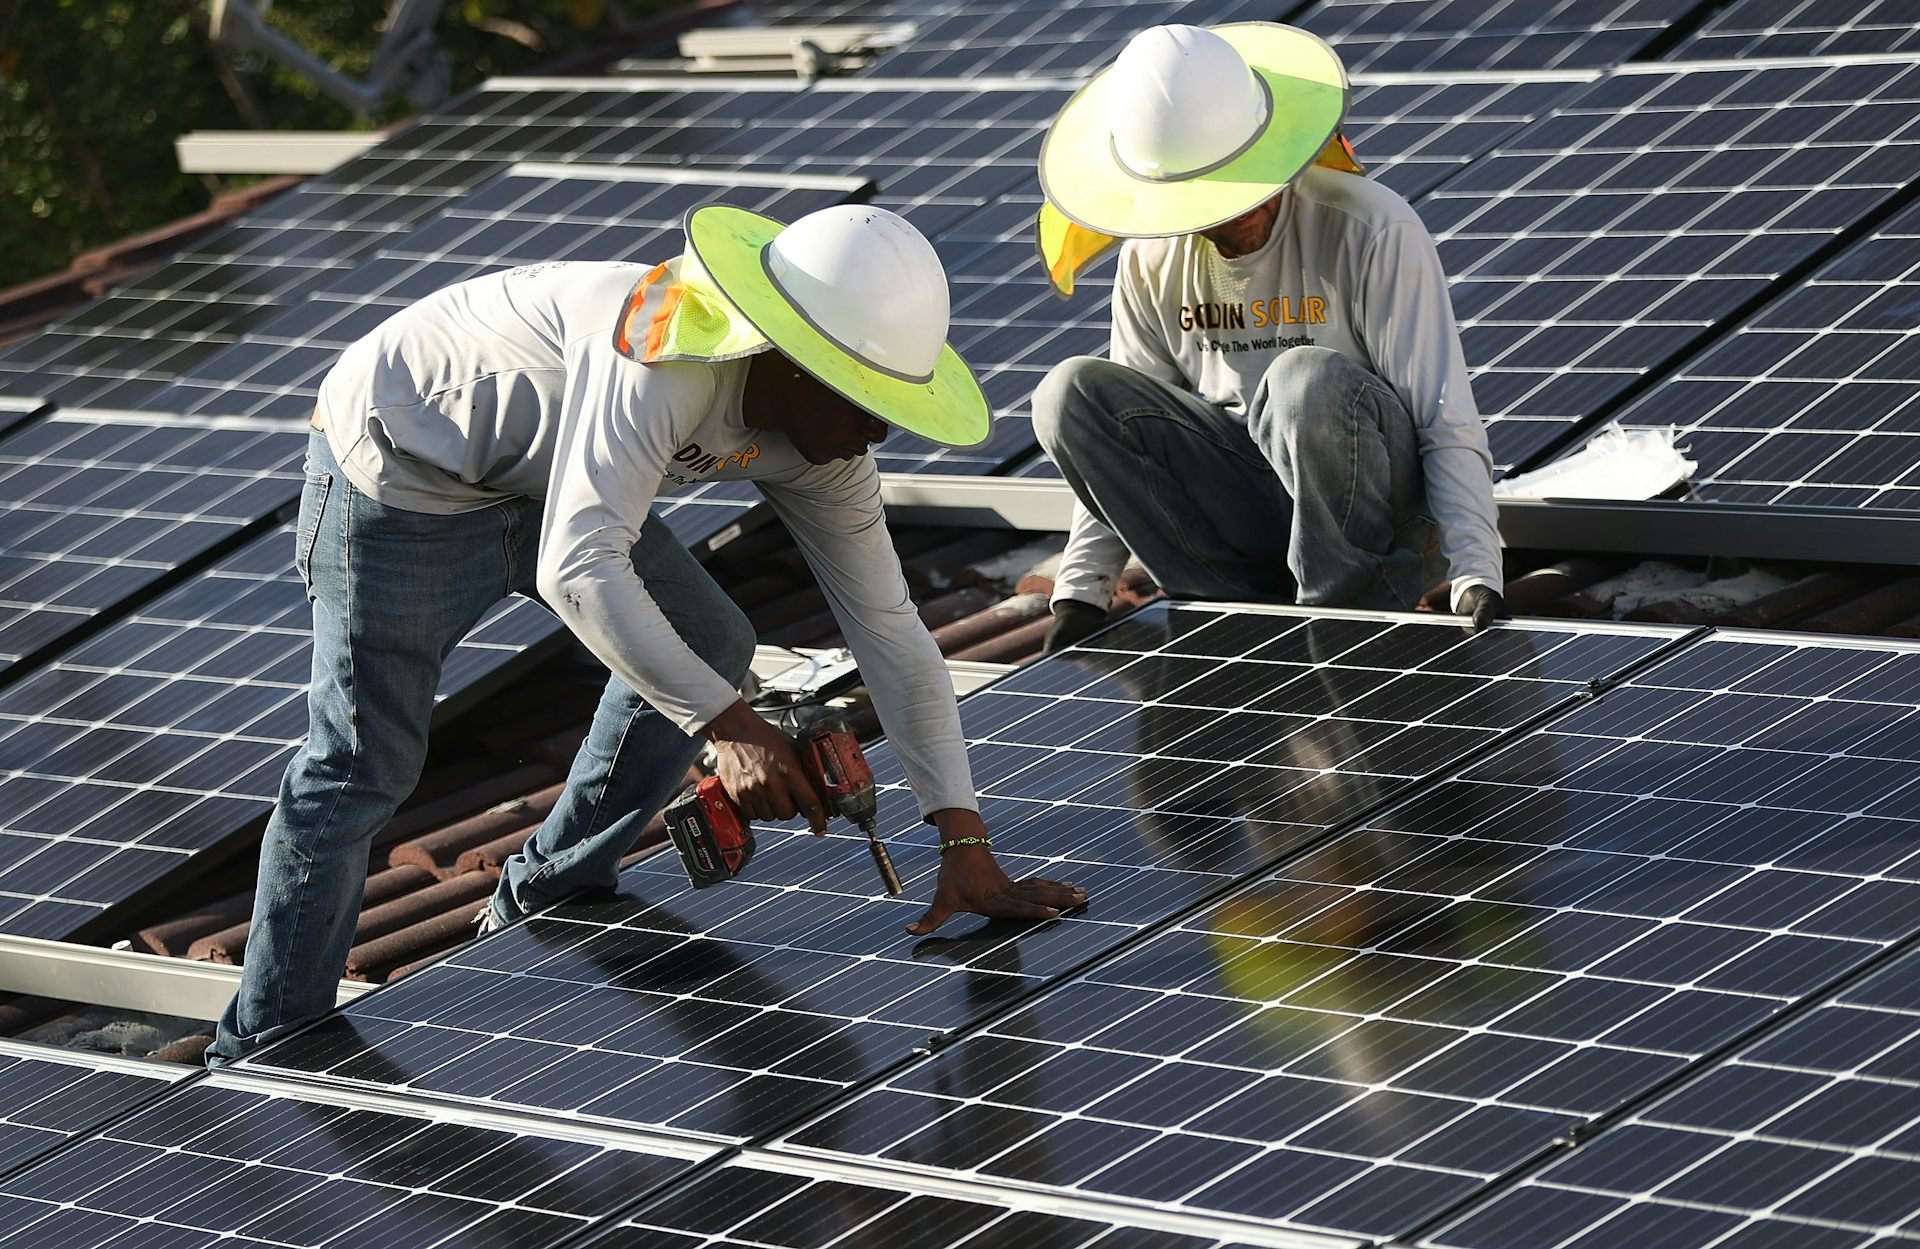 To understand why Biden extended tariffs on solar panels, take a